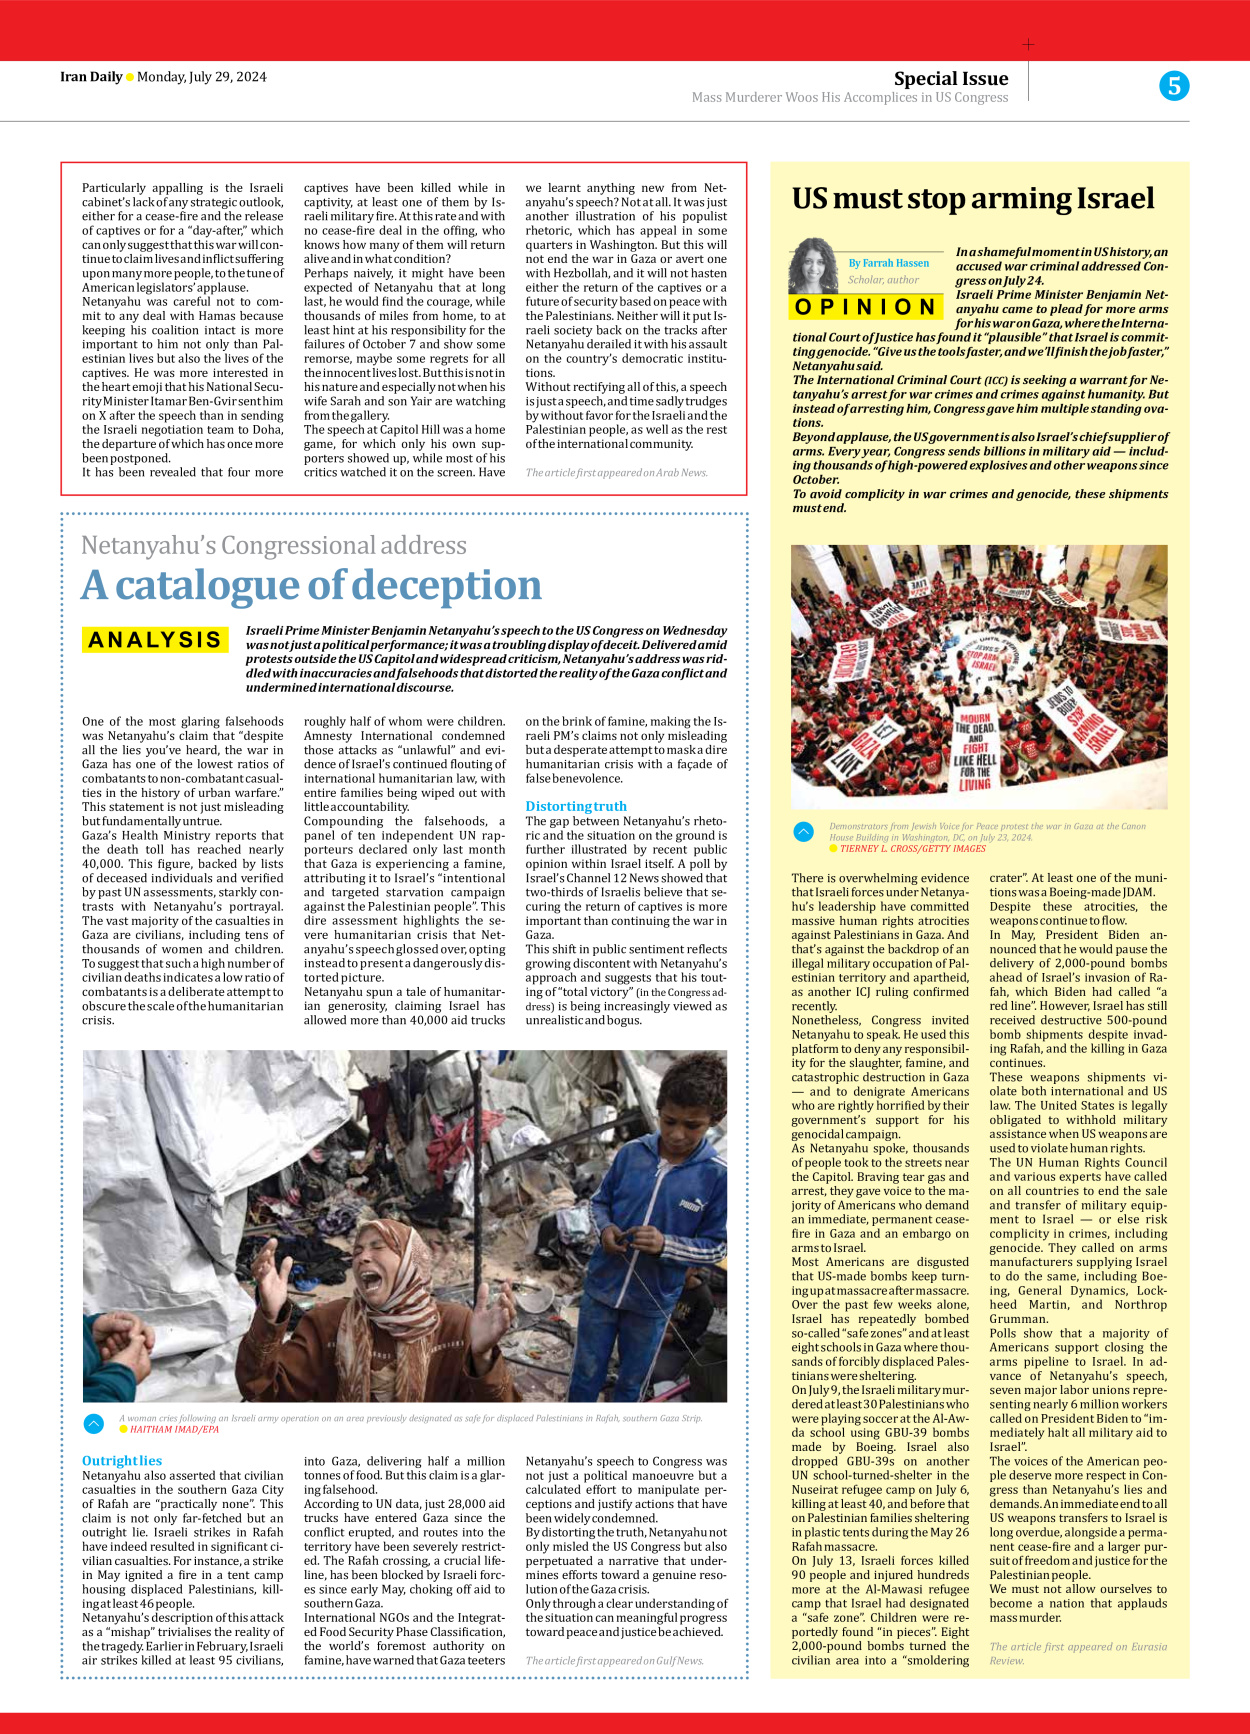 Iran Daily - Number Seven Thousand Six Hundred and Fourteen - 29 July 2024 - Page 5